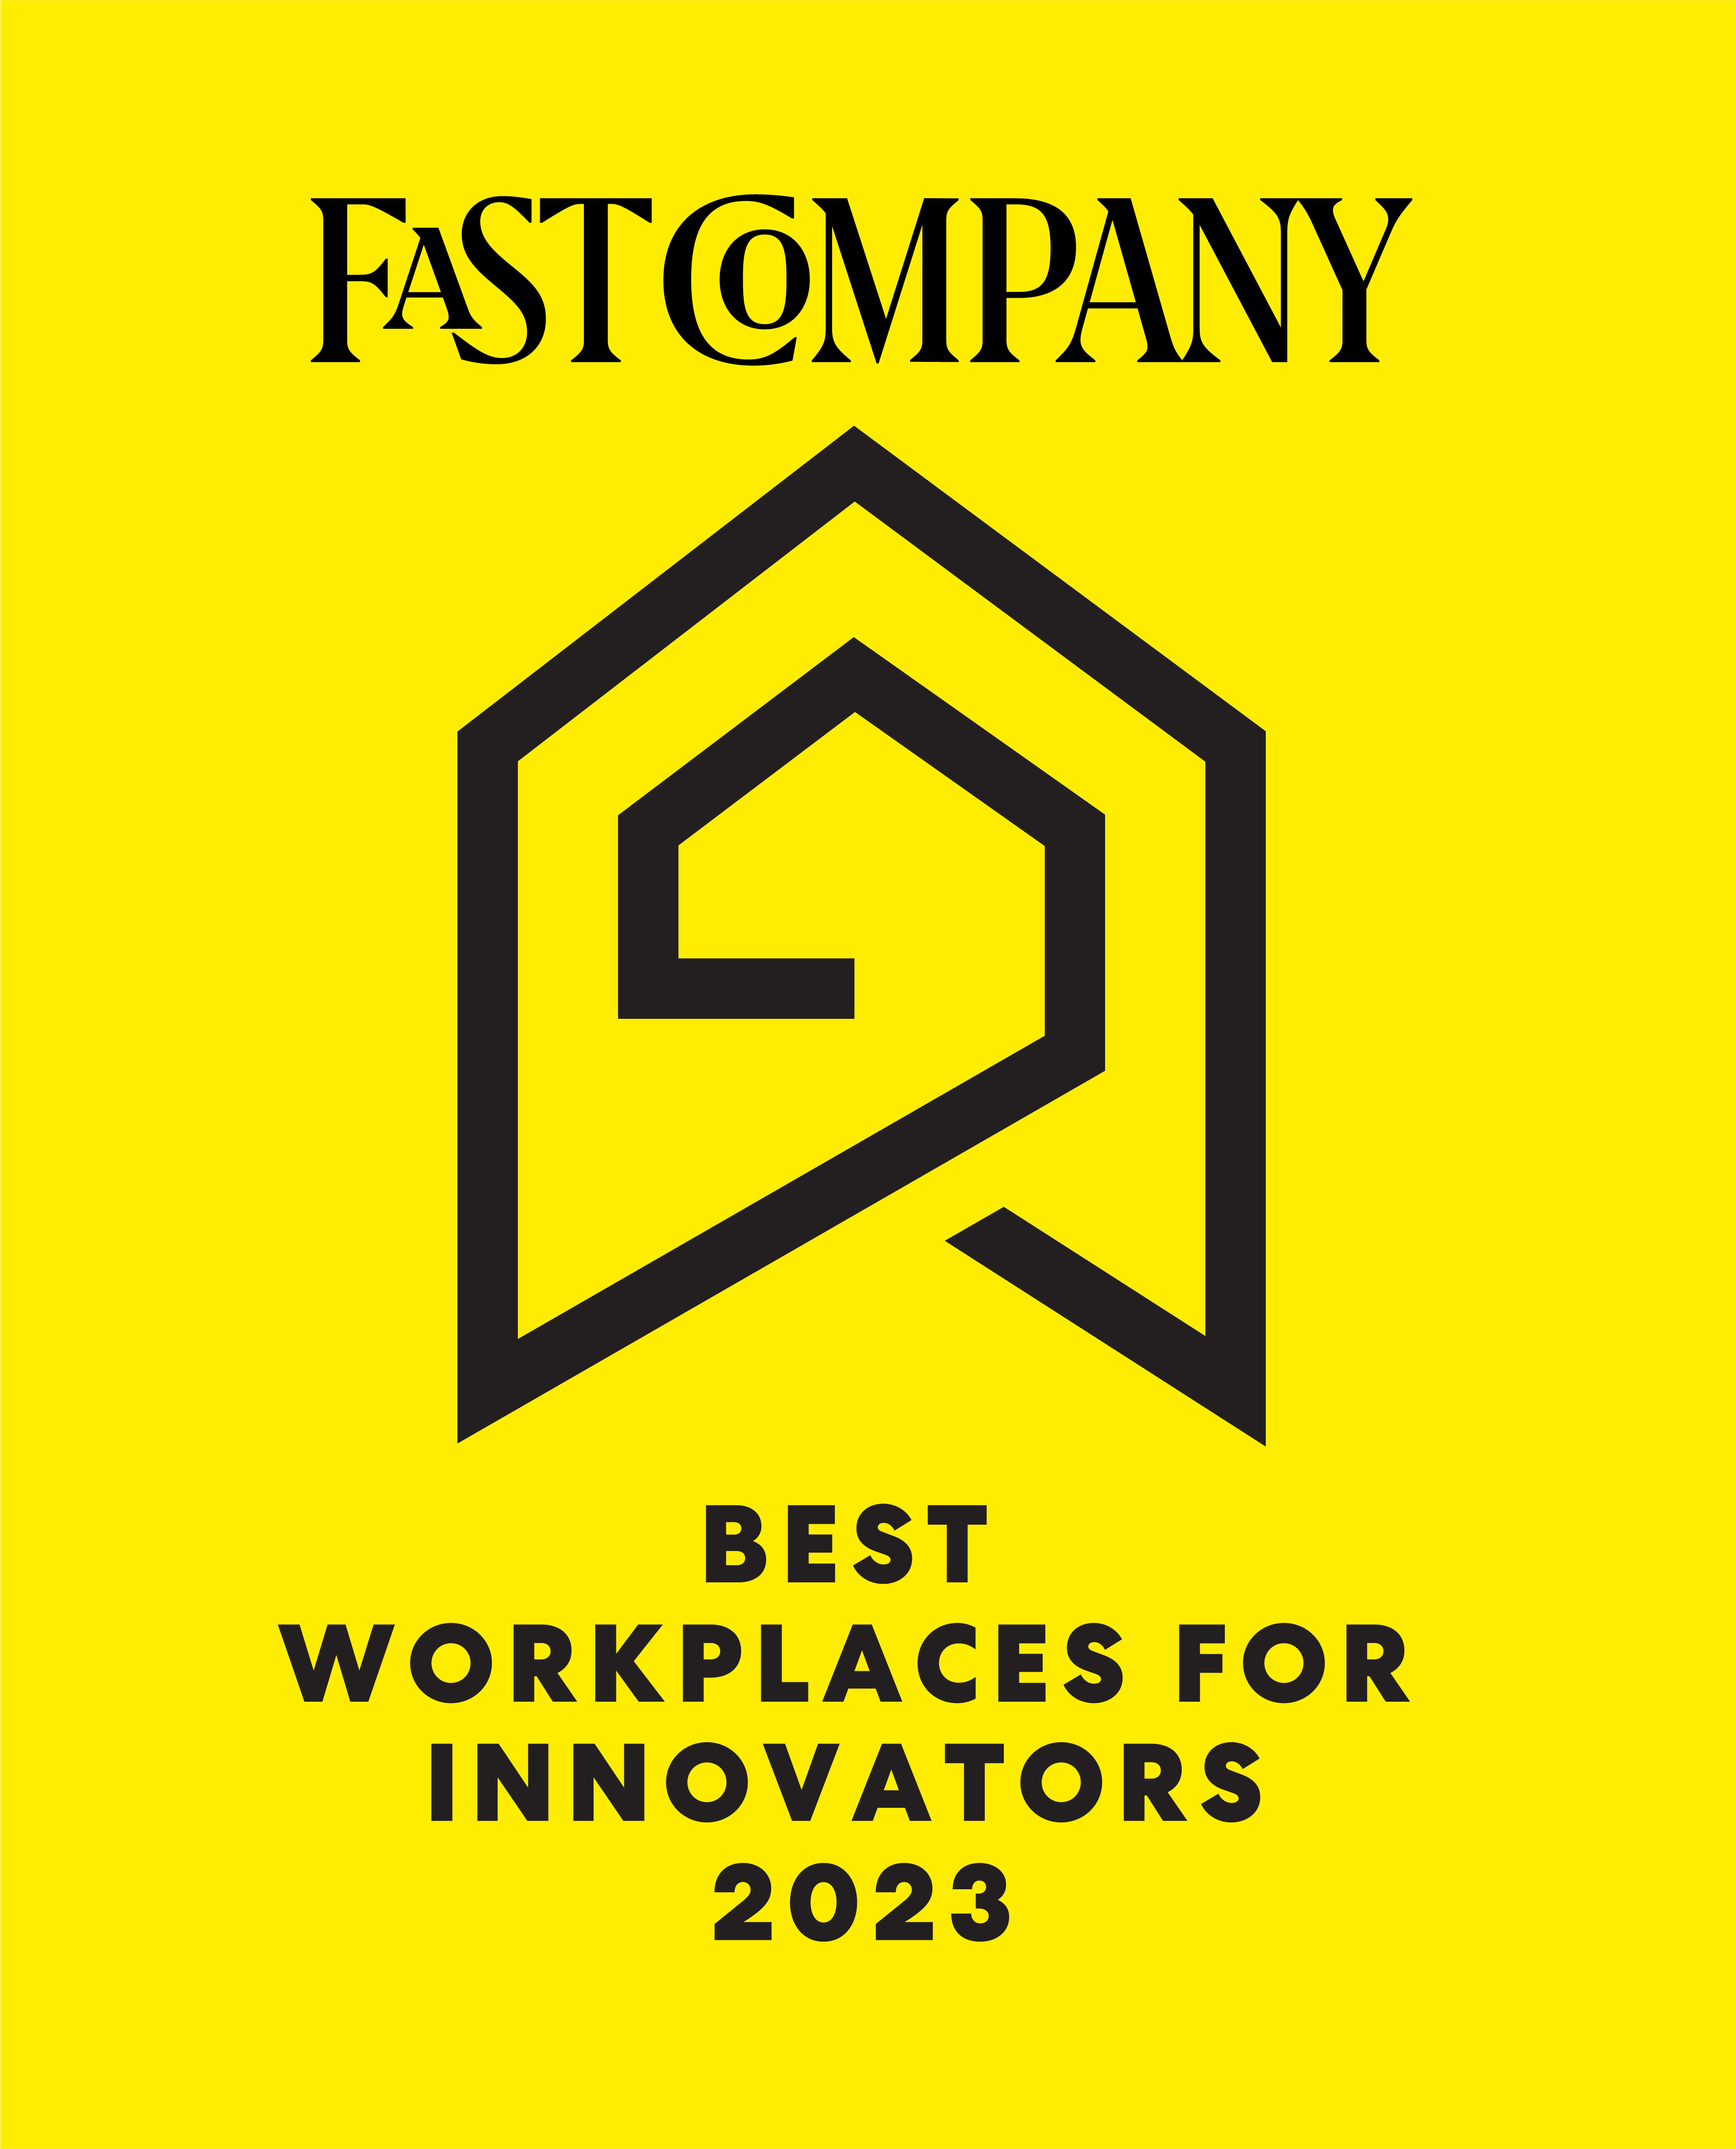 Best Workplace for Innovators.